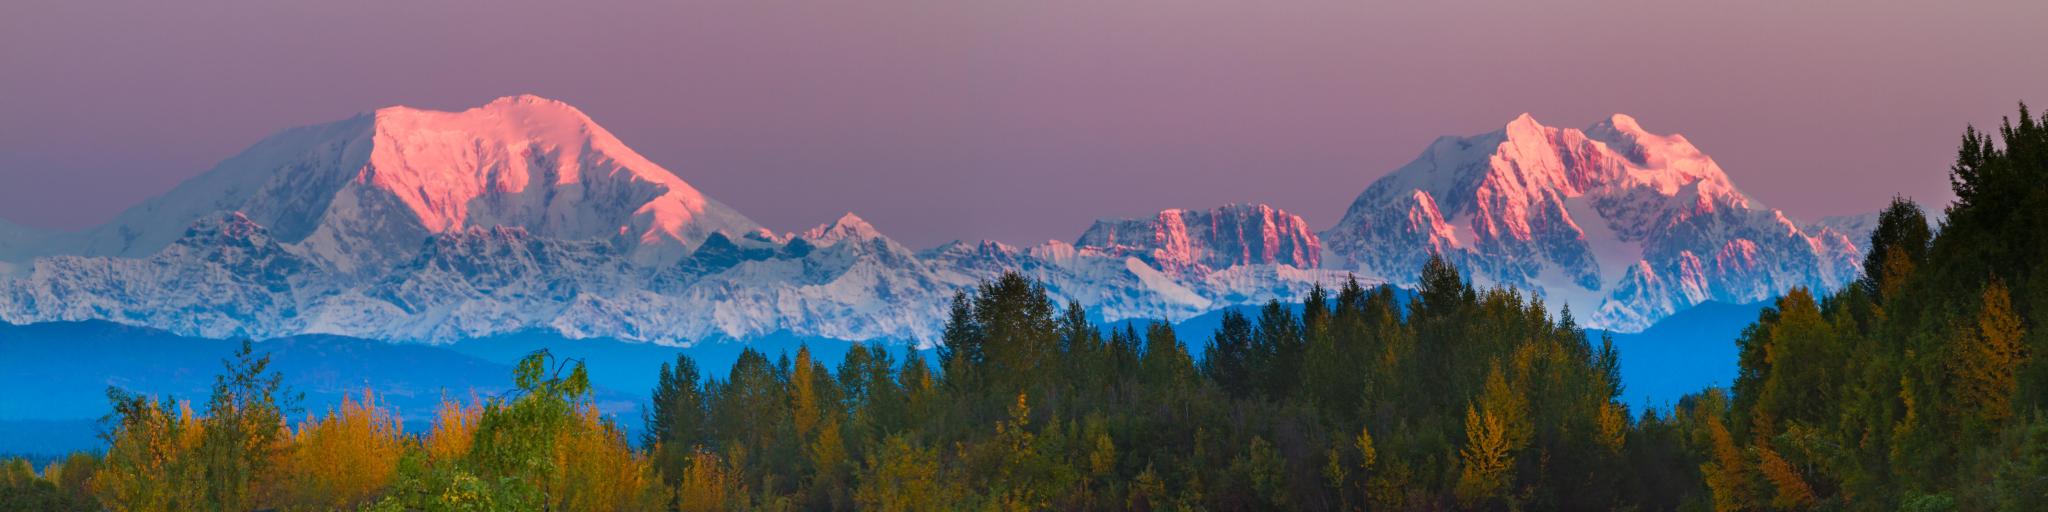 Sunrise with a purple-hued sky over Mt Foraker in Denali National Park, Alaska, with forest in the foreground